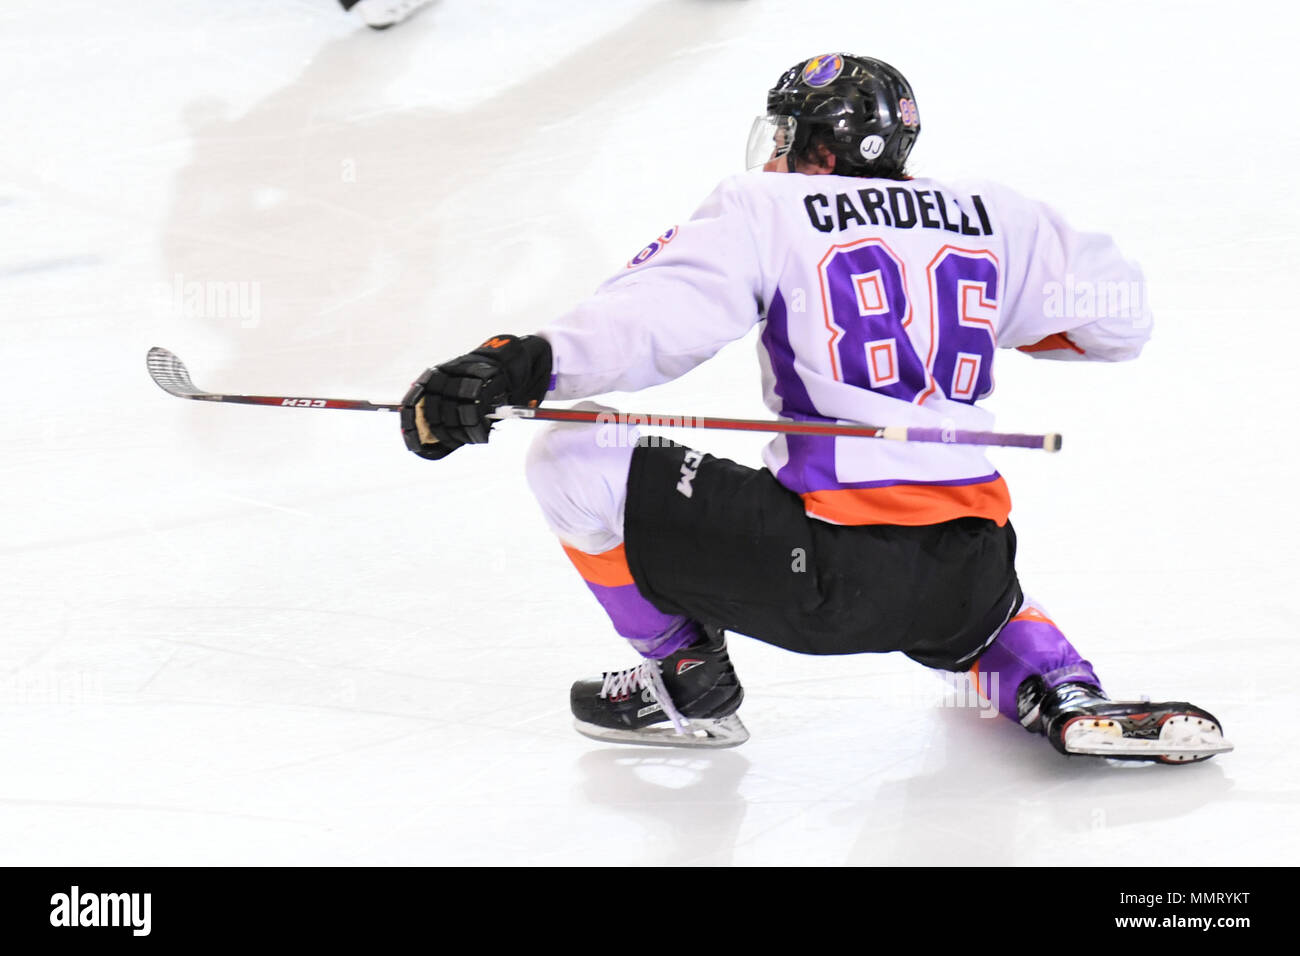 Overtime. 12th May, 2018. Youngstown Phantoms forward Nicholas Cardelli (86) celebrates after scoring the game winning goal in game two of the finals for the United States Hockey League's Clark Cup held at Scheels Arena in Fargo, North Dakota. Youngstown won the game 3-2 in overtime. Russell Hons/CSM/Alamy Live News Stock Photo